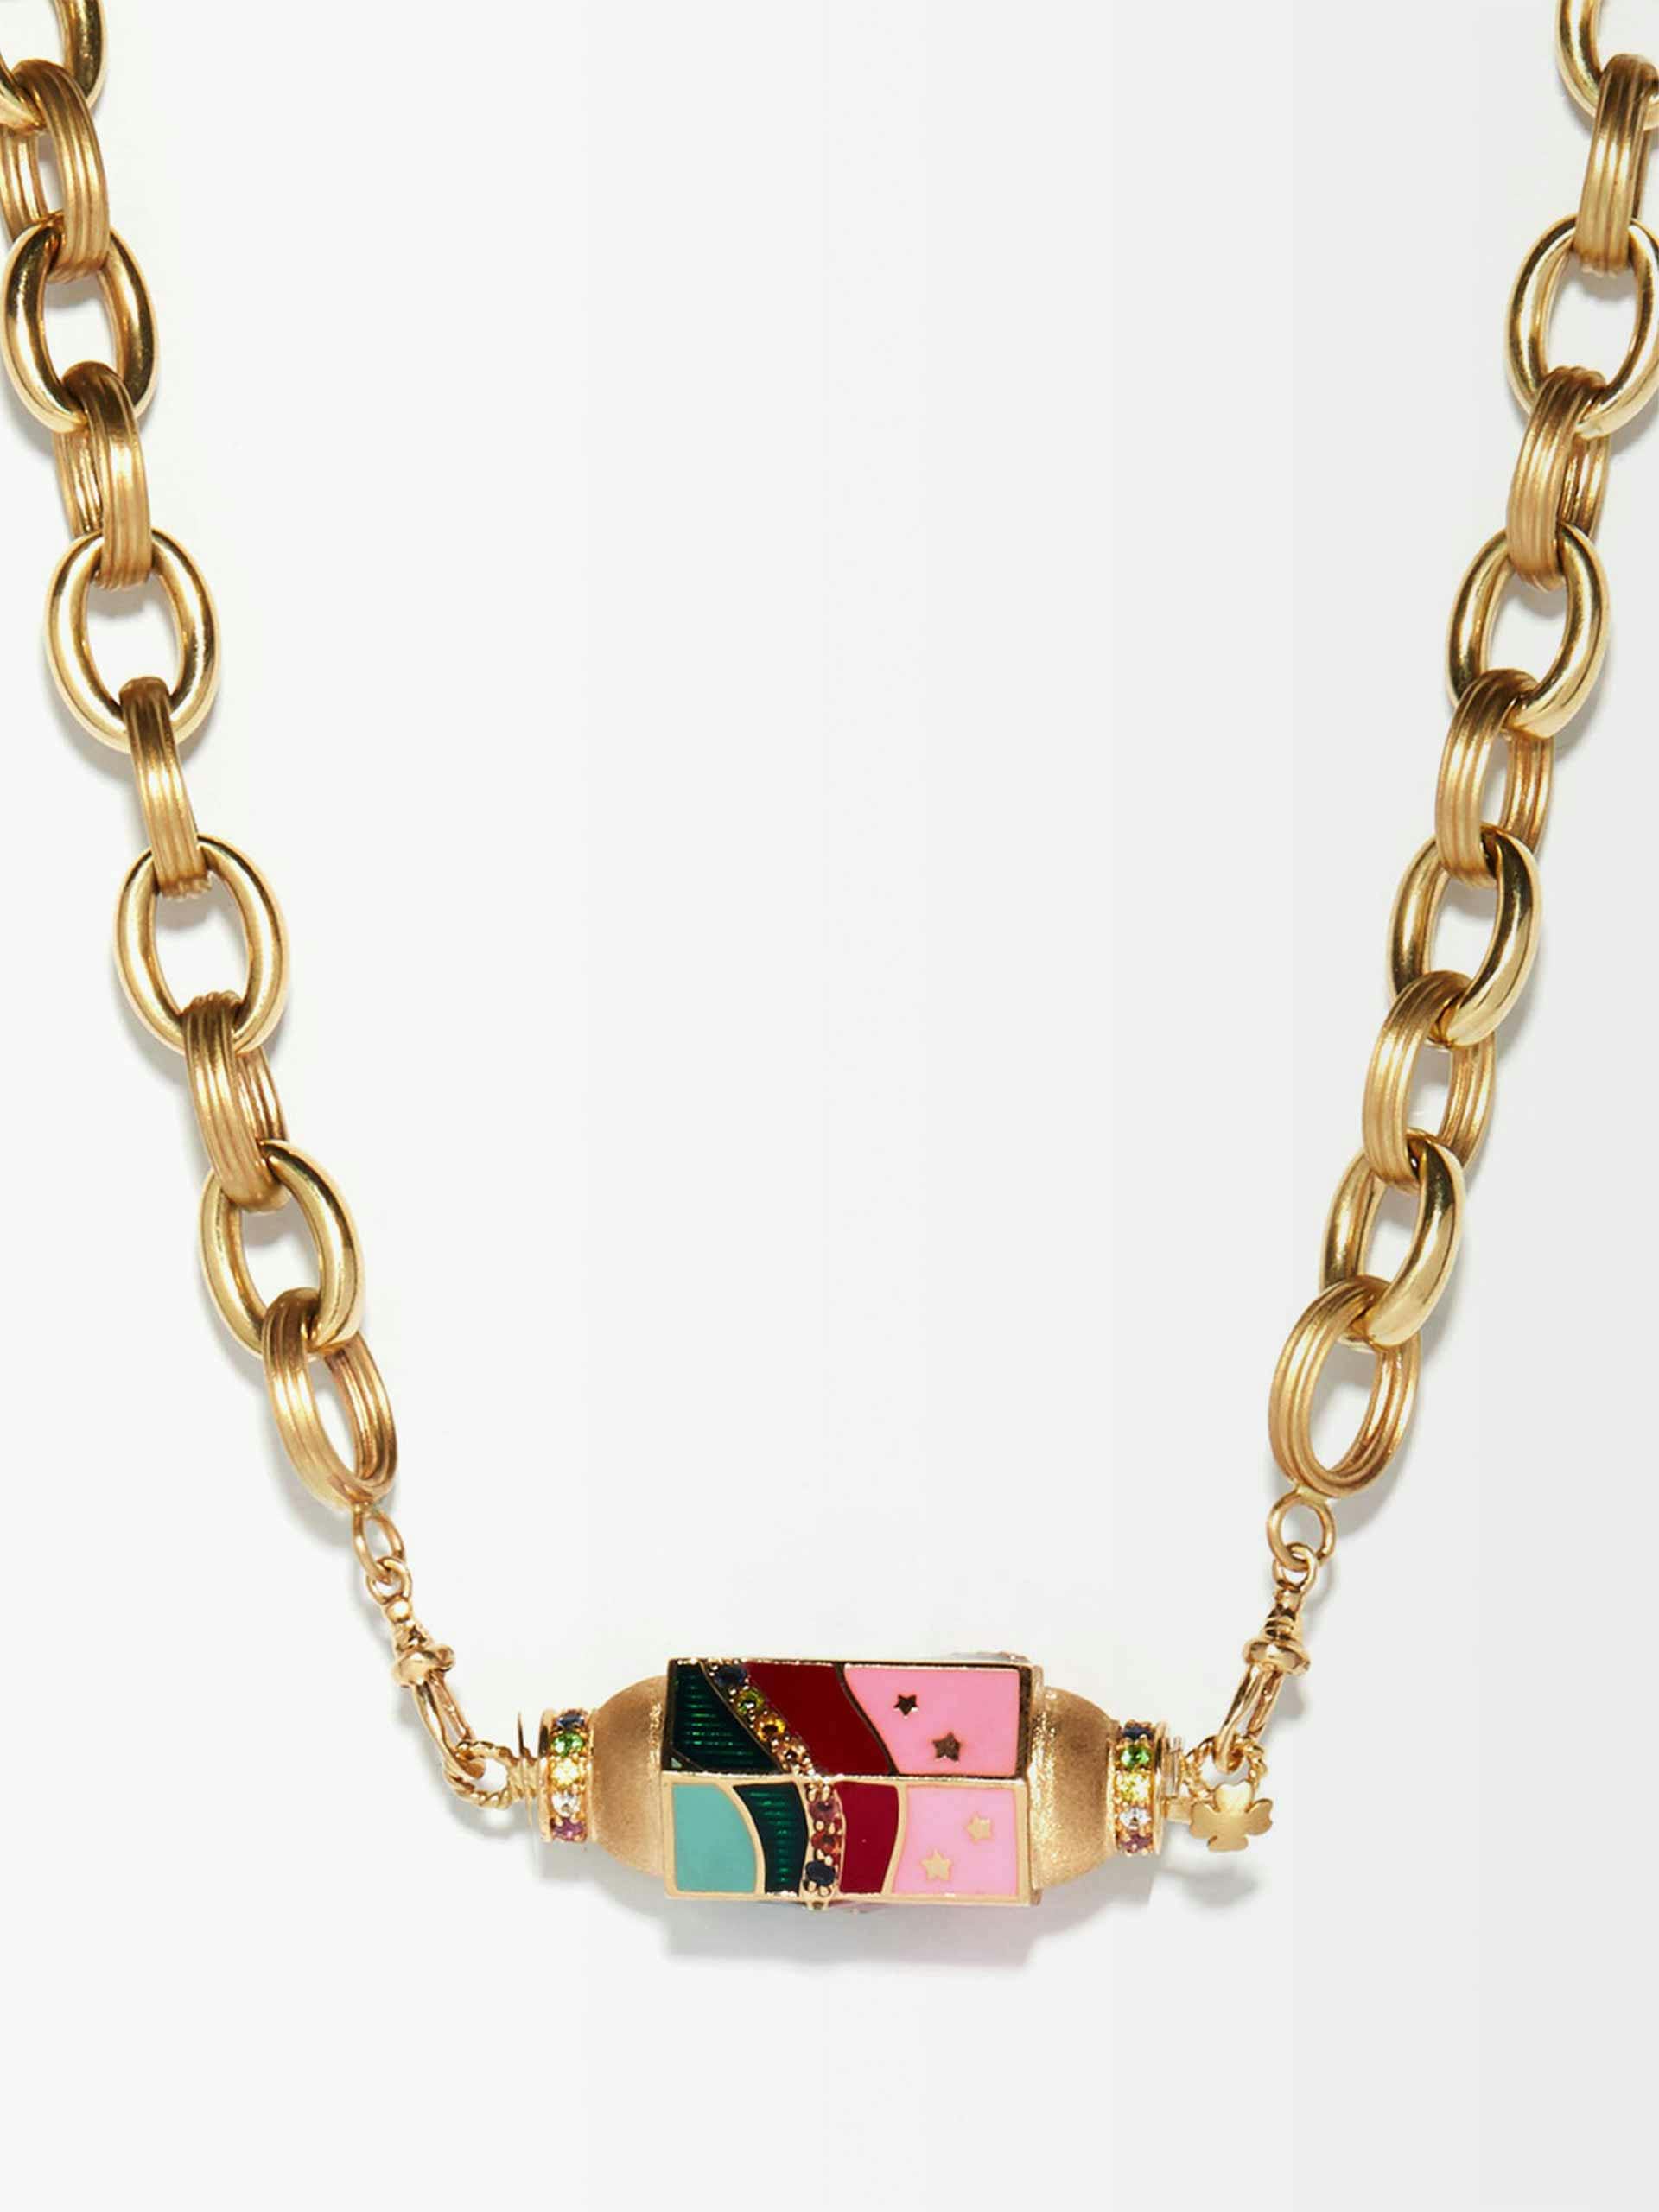 Enamel and gold choker necklace